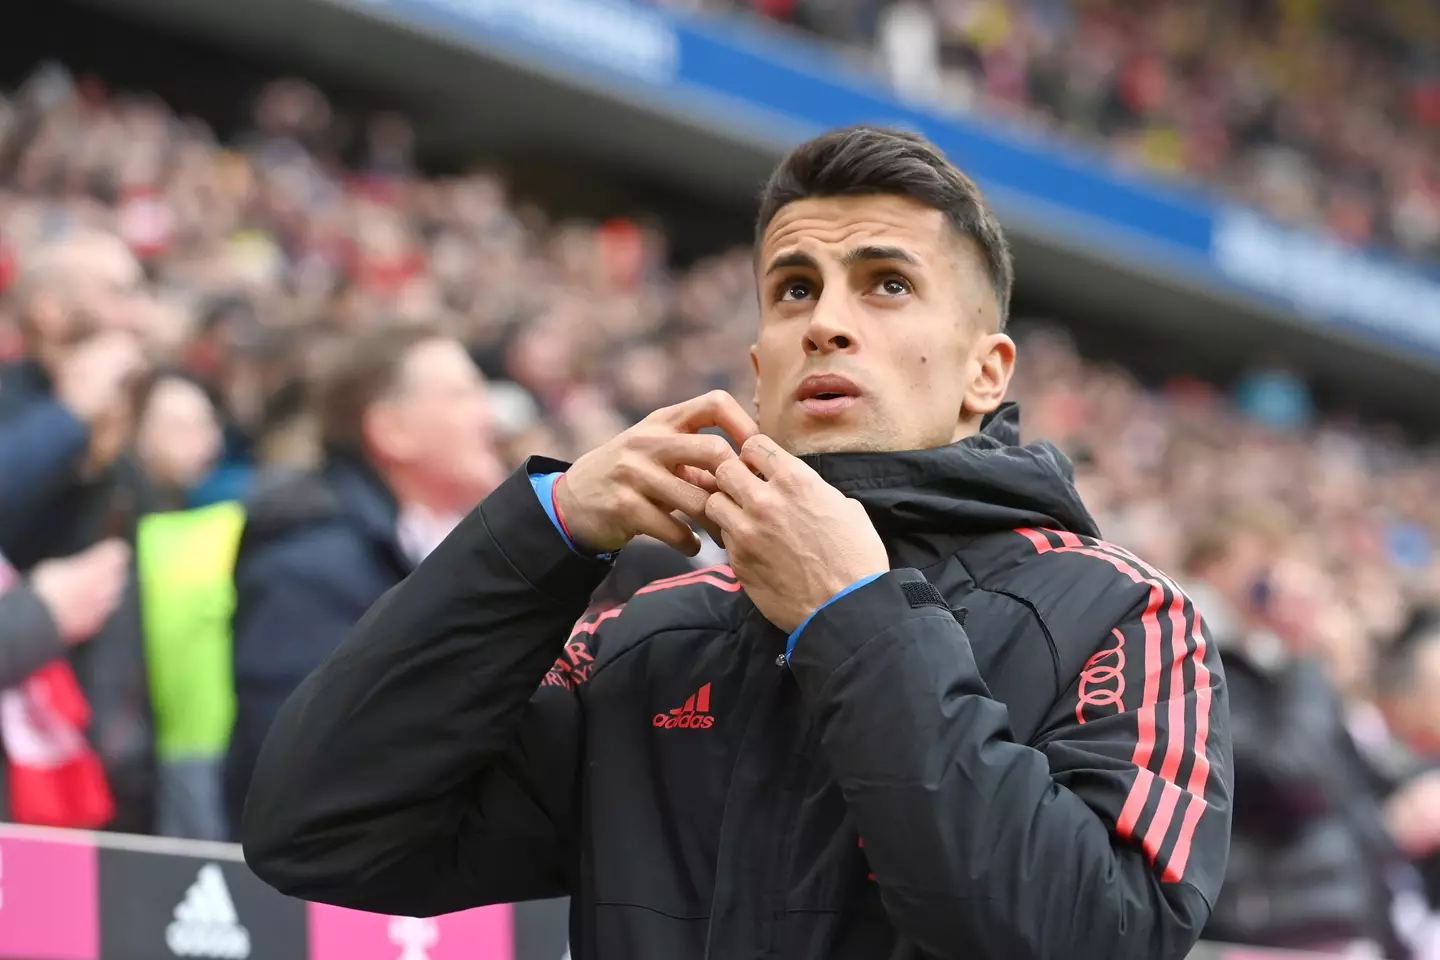 Joao Cancelo is cutting a frustrated figure at Bayern Munich. (